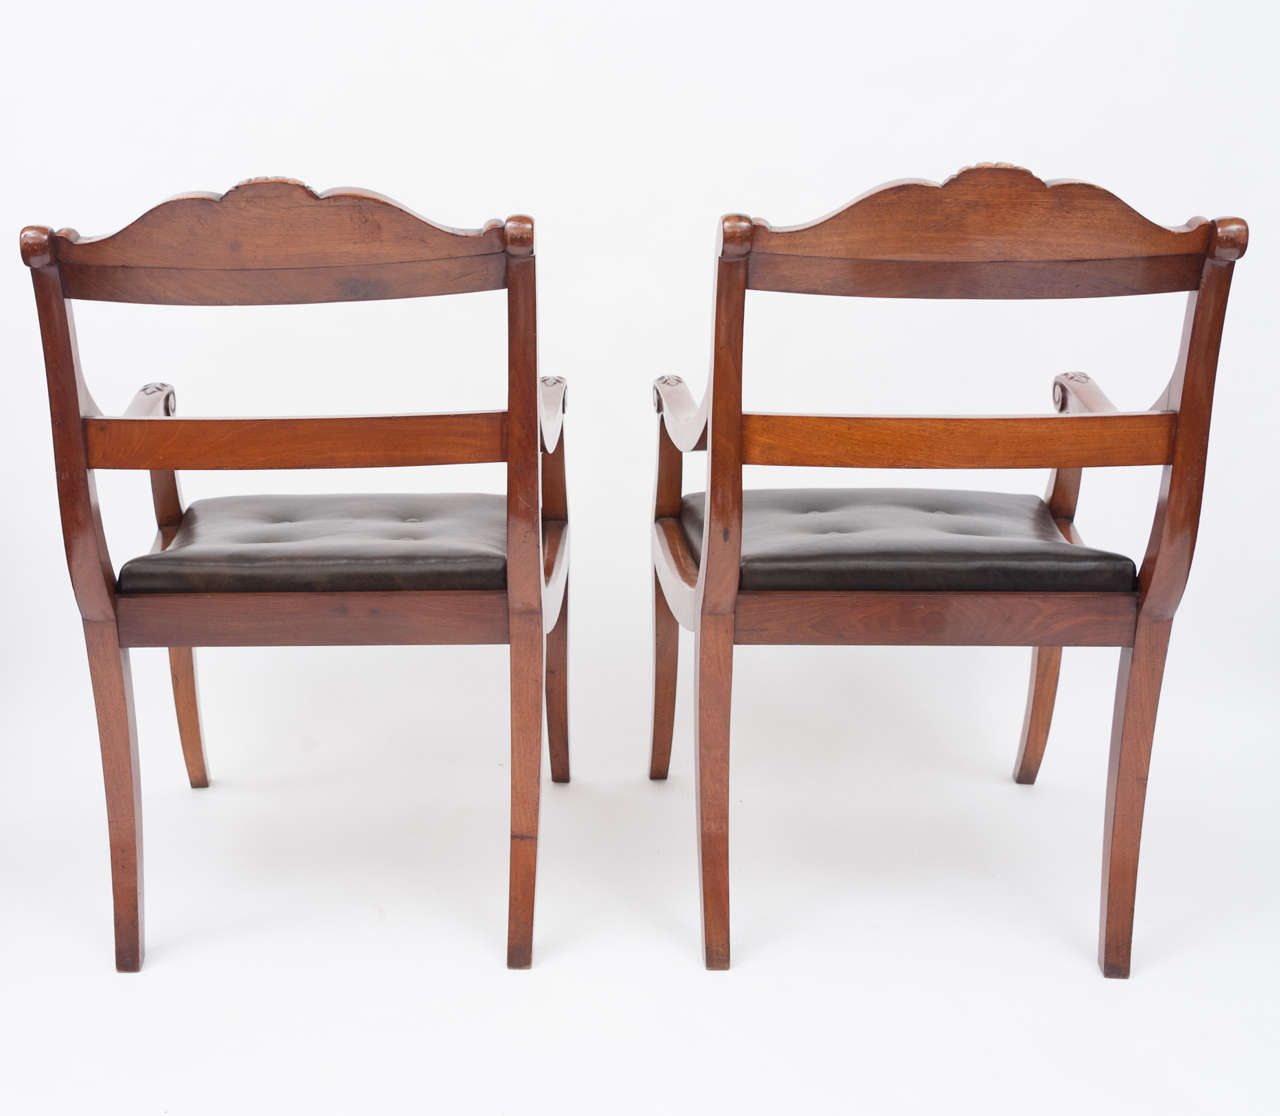 Early 19th Century Pair of Mahogany Open Armchairs For Sale at 1stDibs